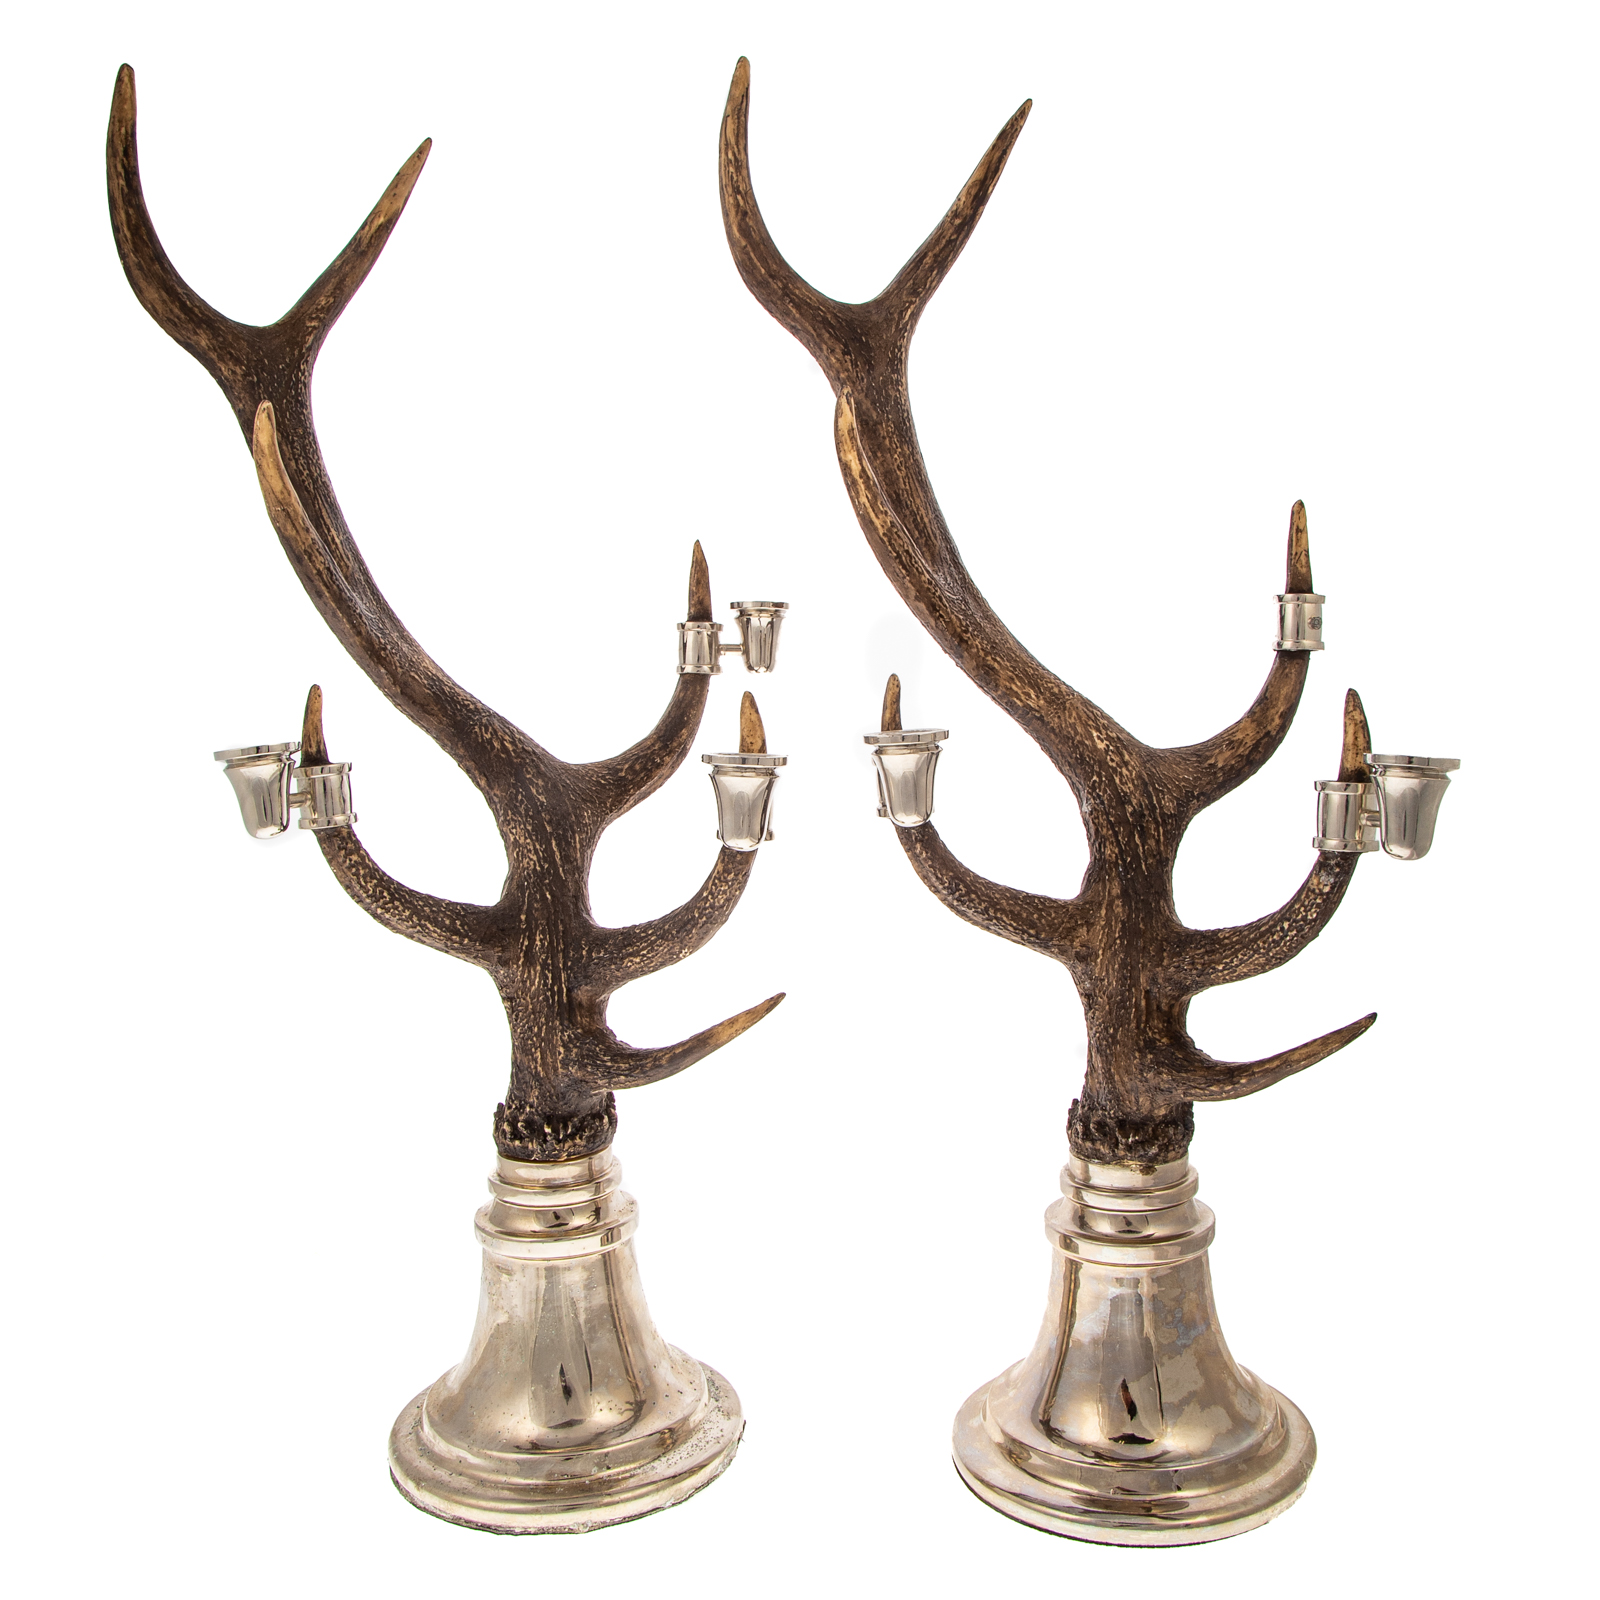 A PAIR OF RUSTIC STYLE ANTLER CANDELABRA